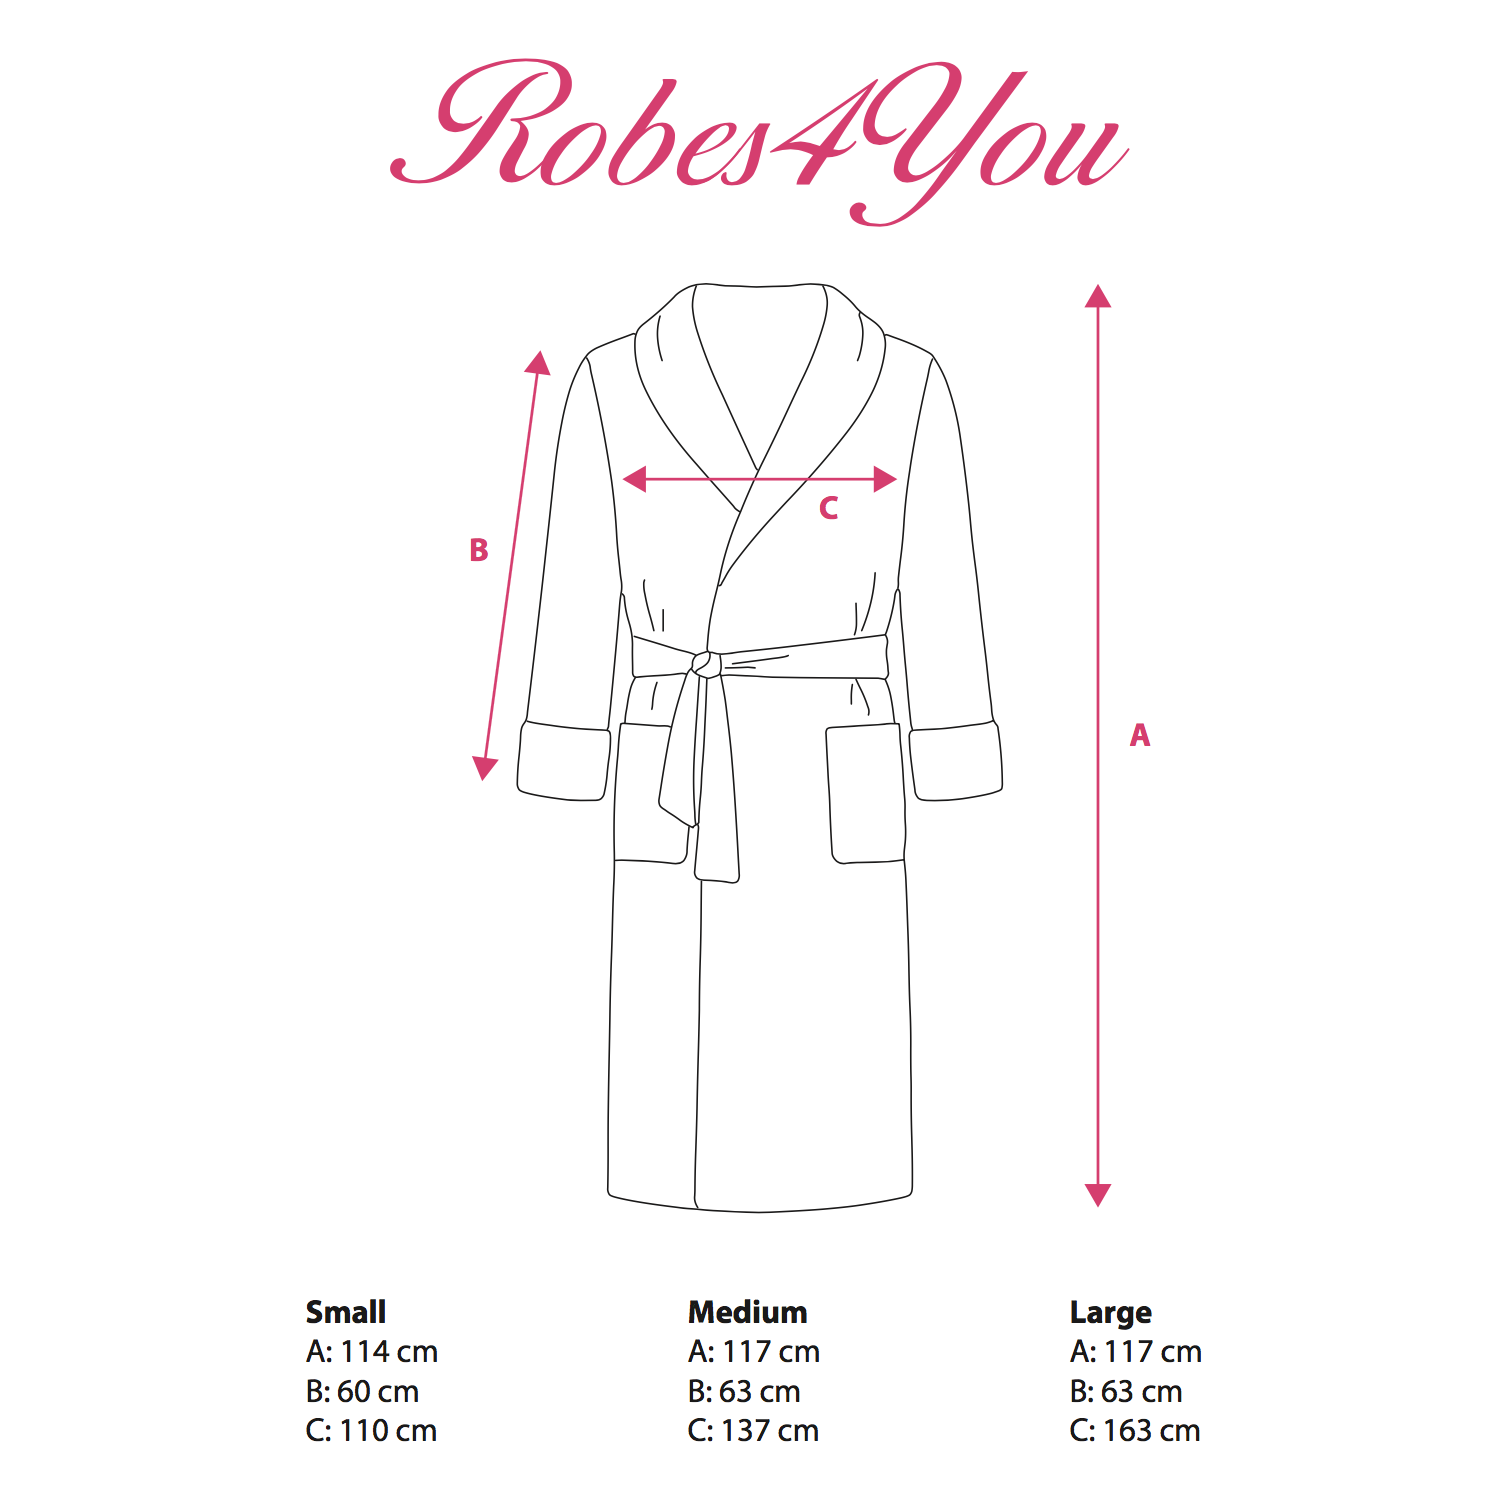 Robes4you-size chart 